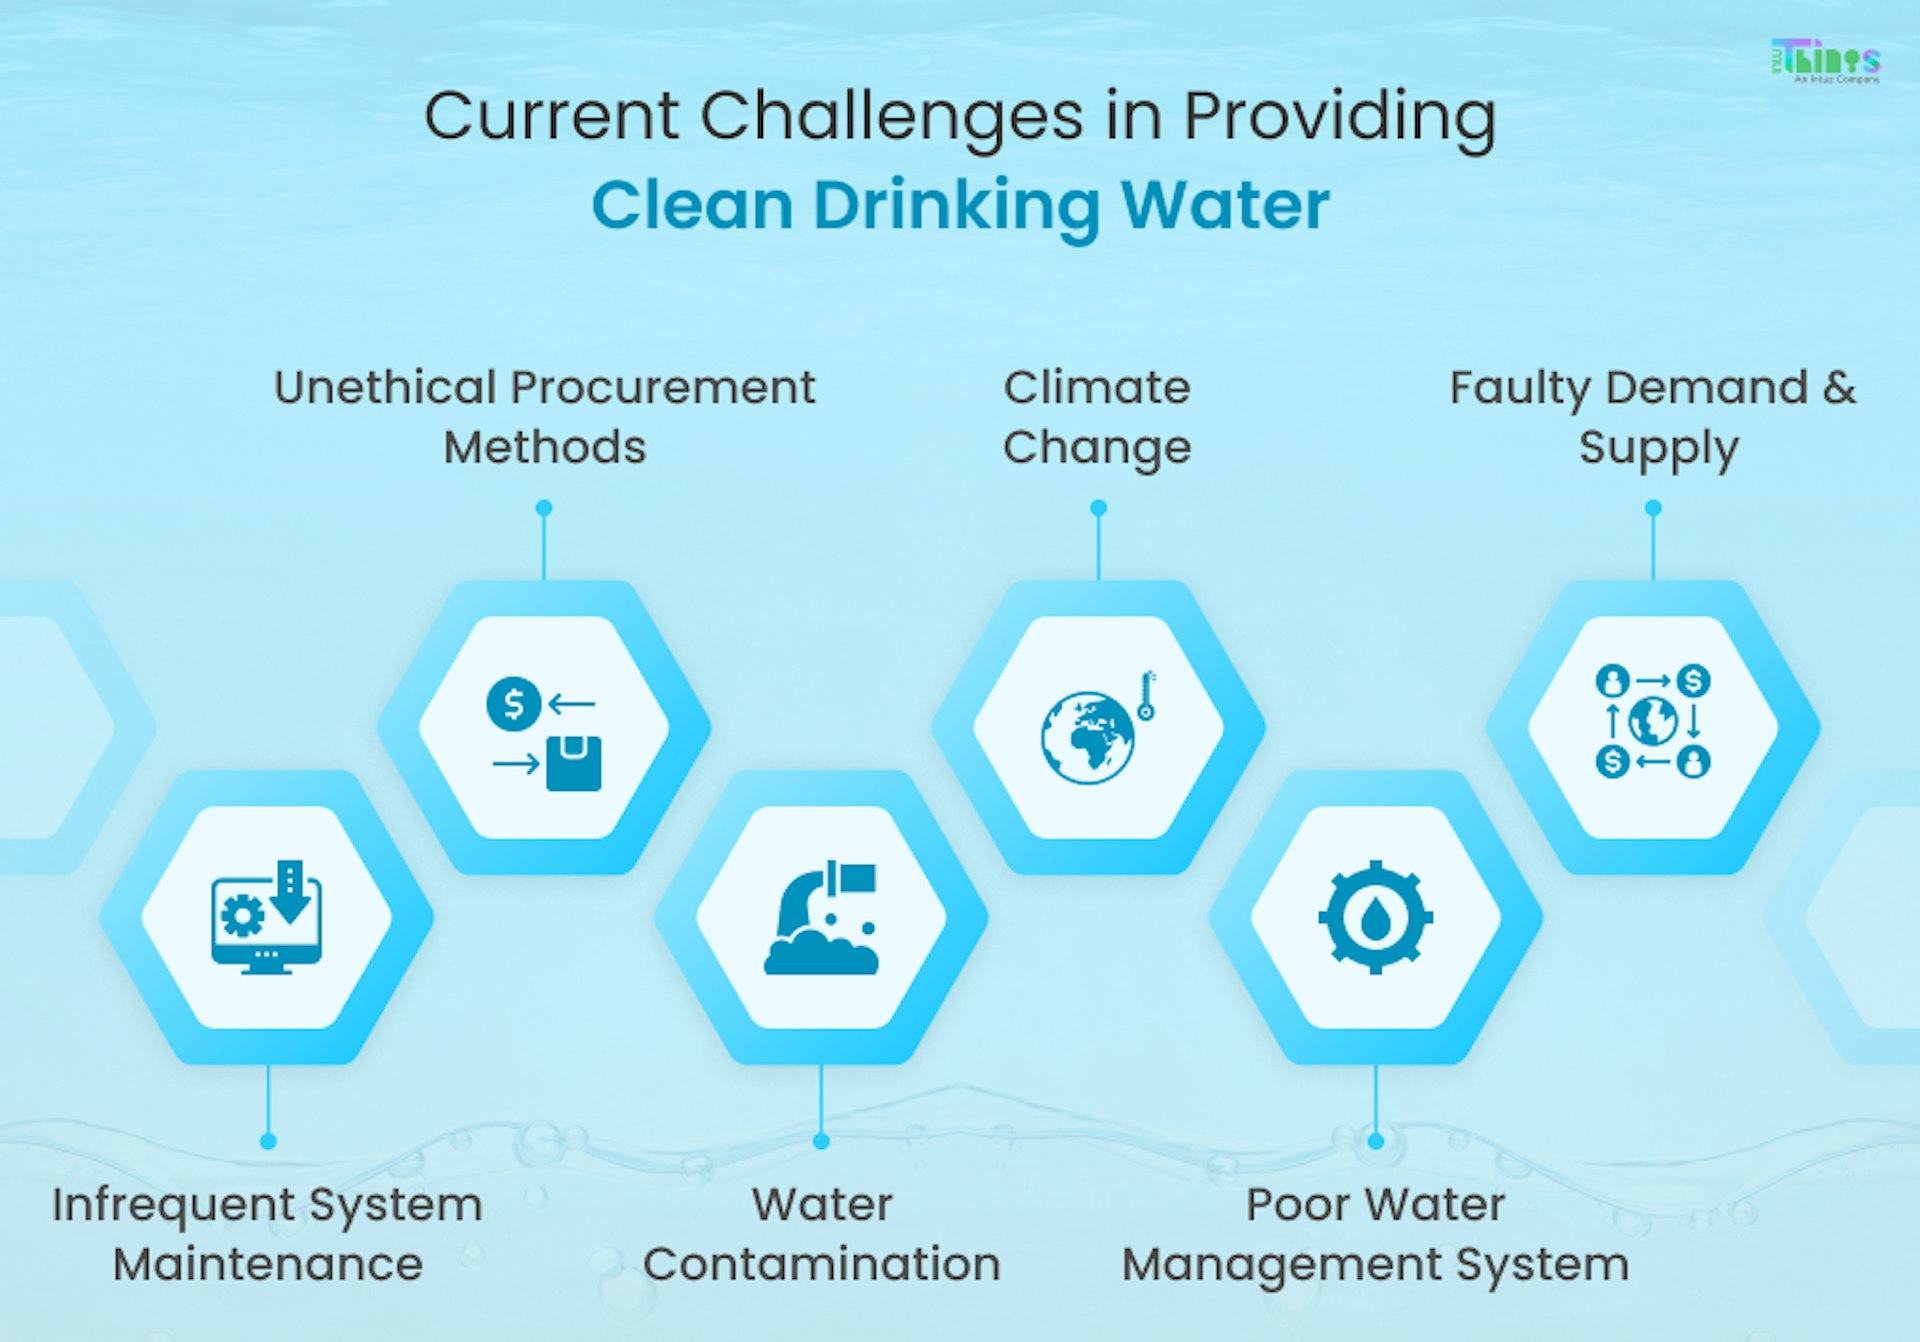 Challenges in providing clean drinking water